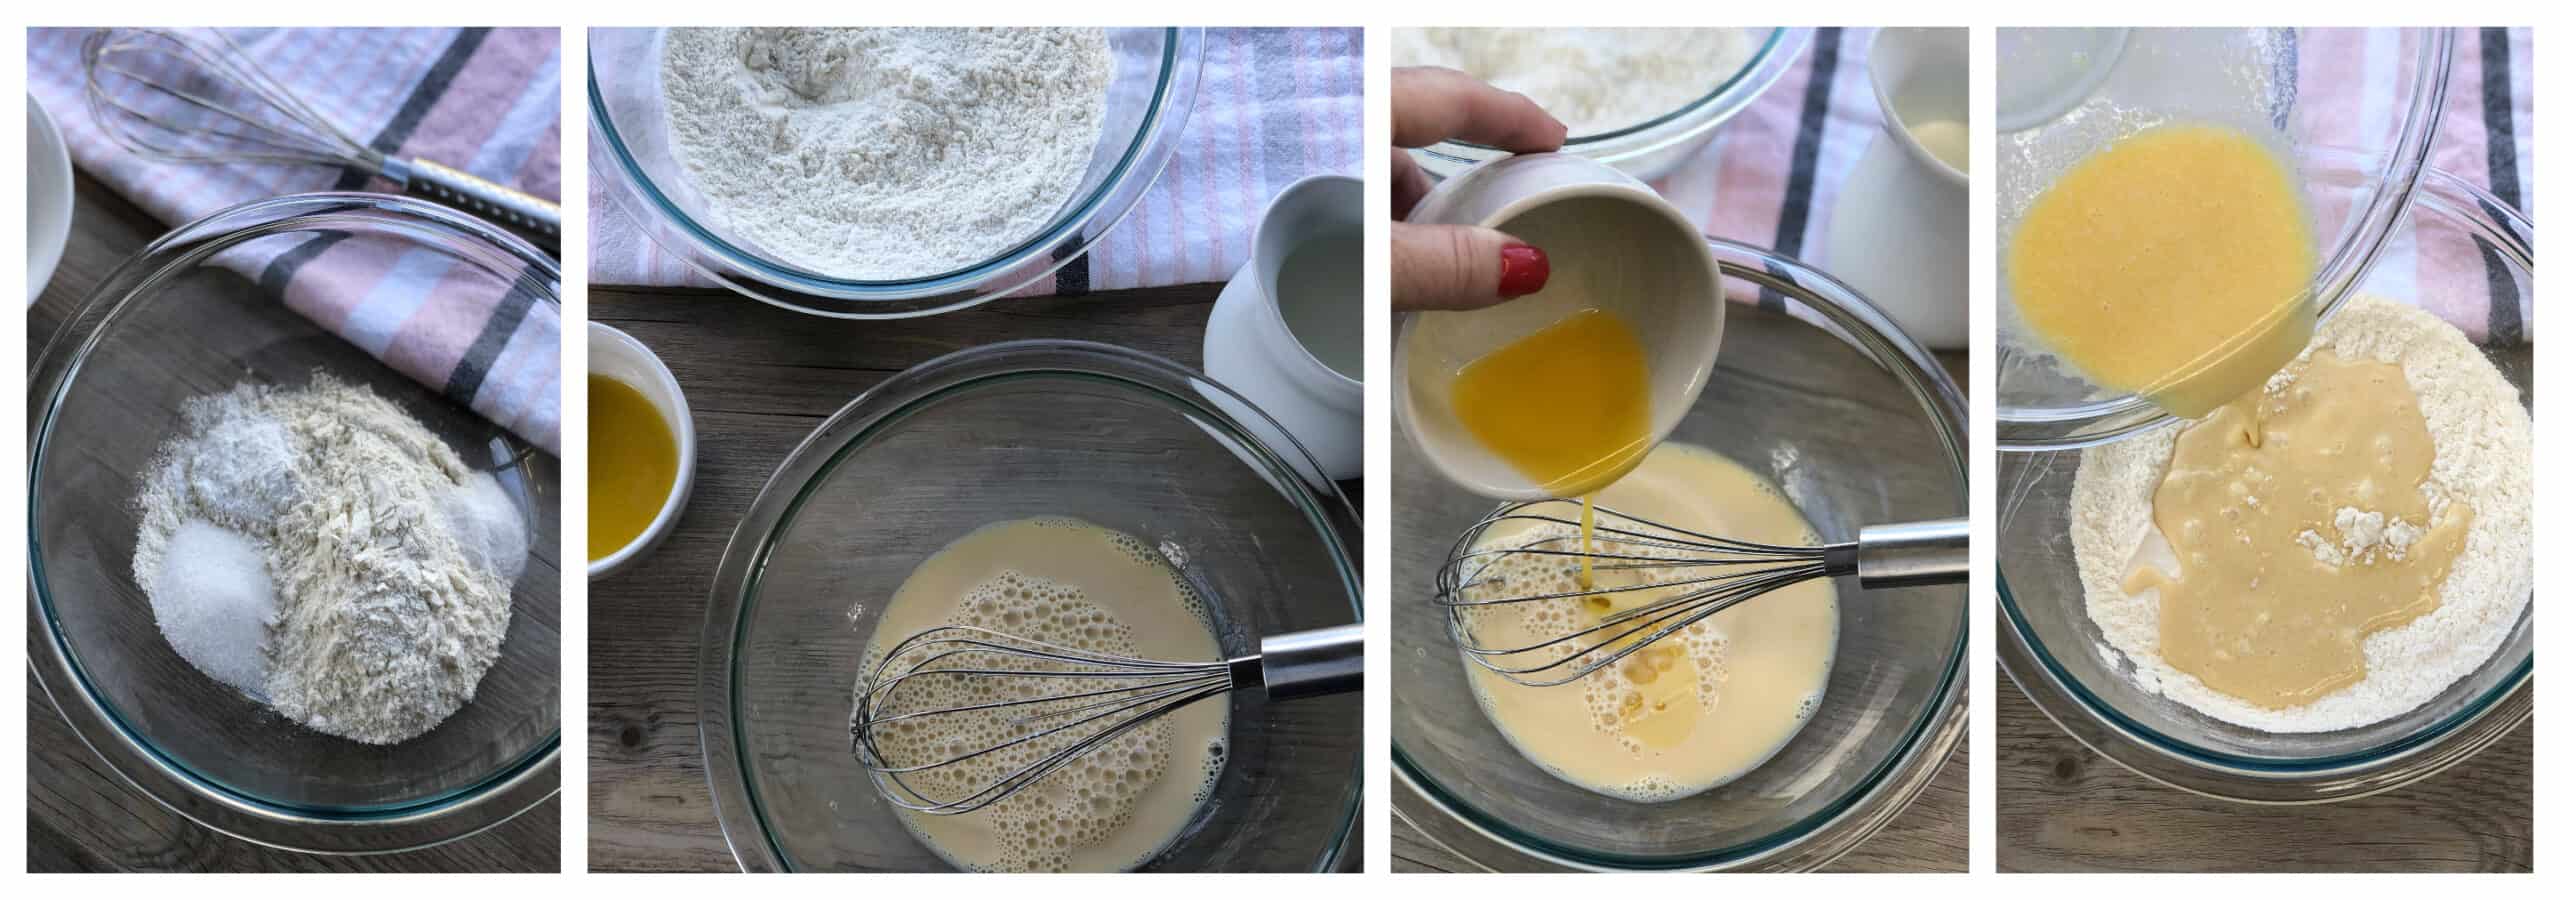 Photos showing step by step process to making waffles 